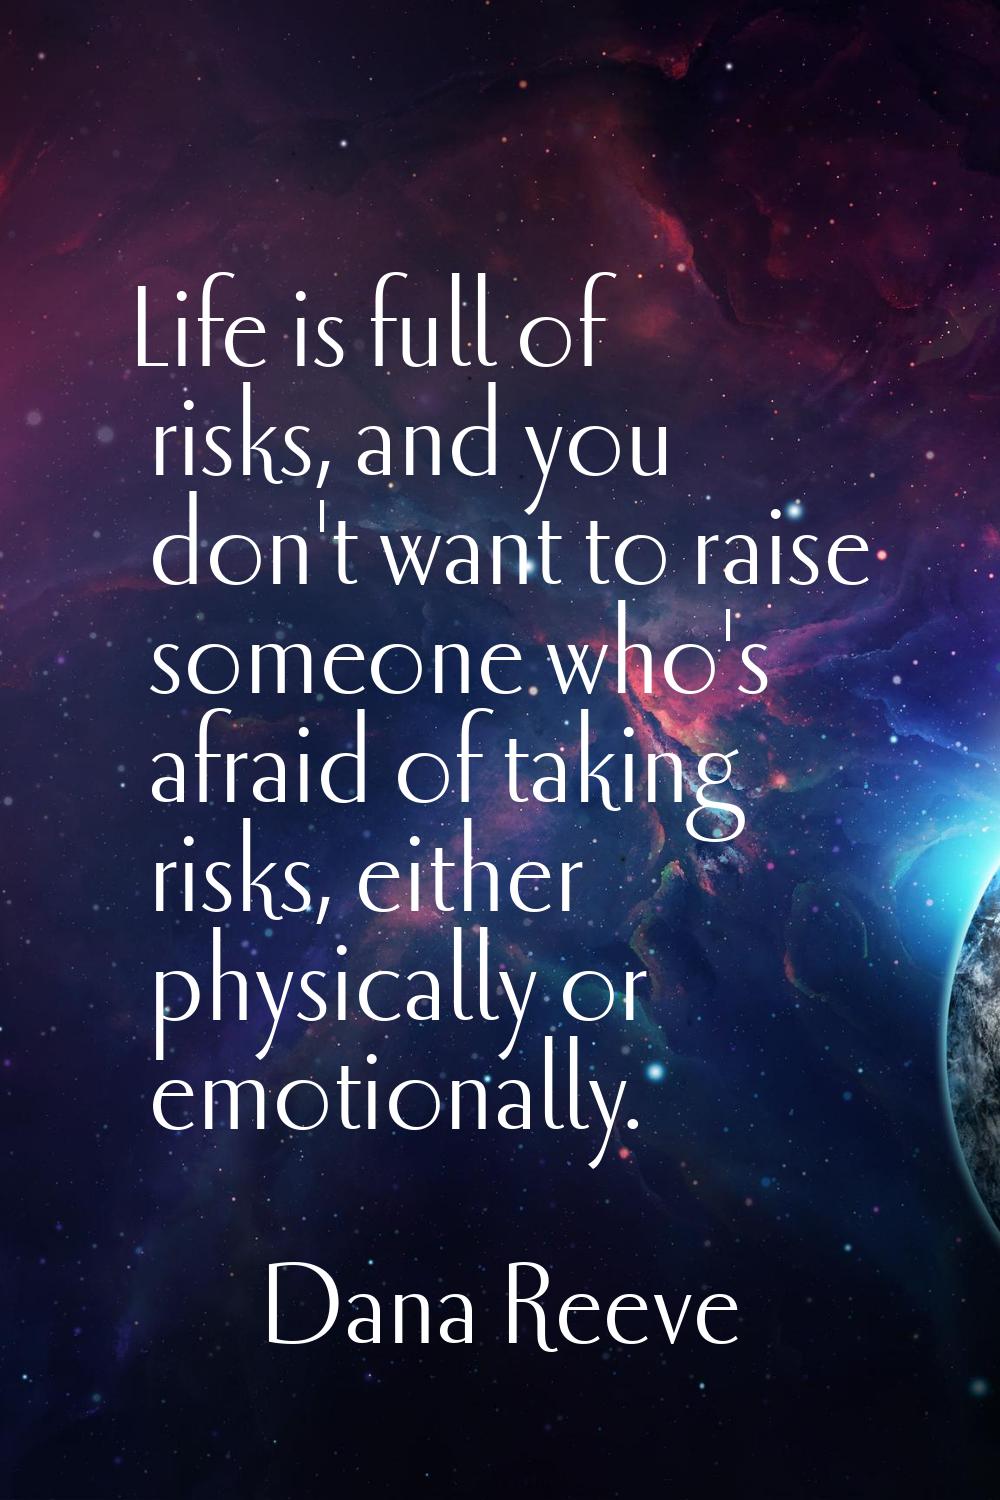 Life is full of risks, and you don't want to raise someone who's afraid of taking risks, either phy